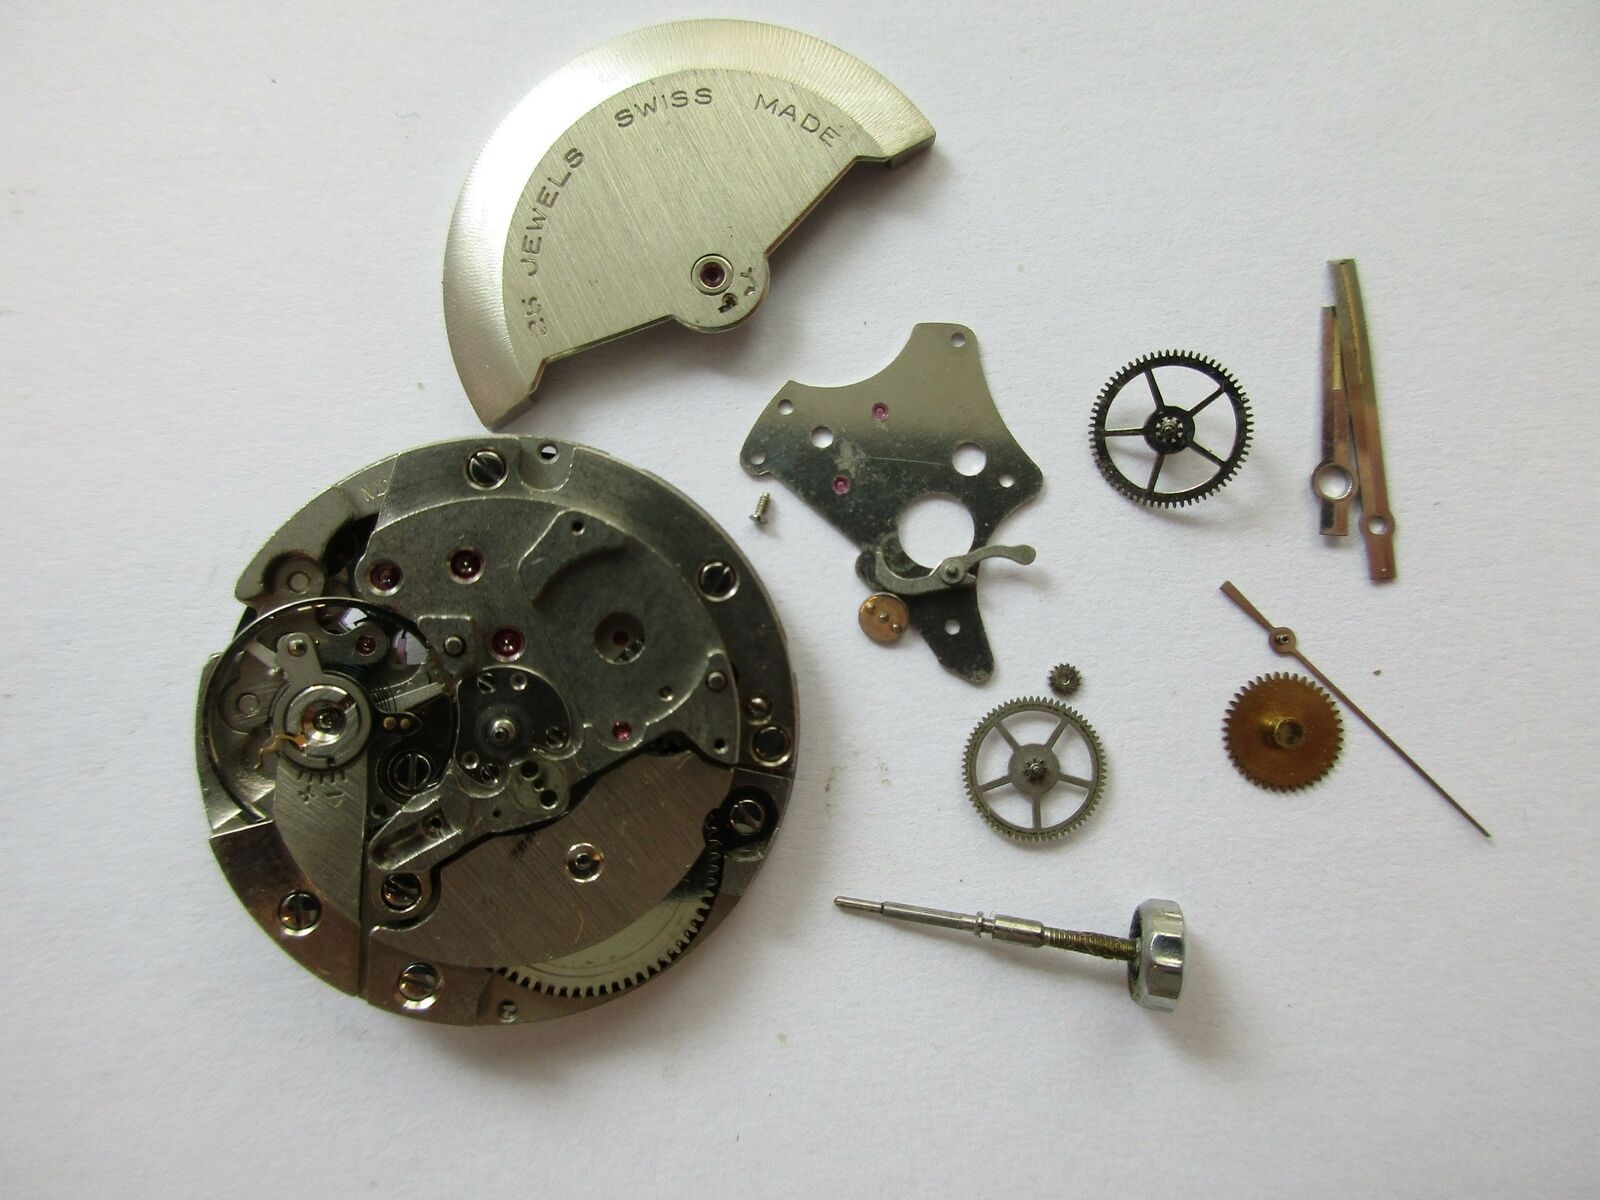 Felsa cal. 4007 automatic disassembled watch movement - for use of parts